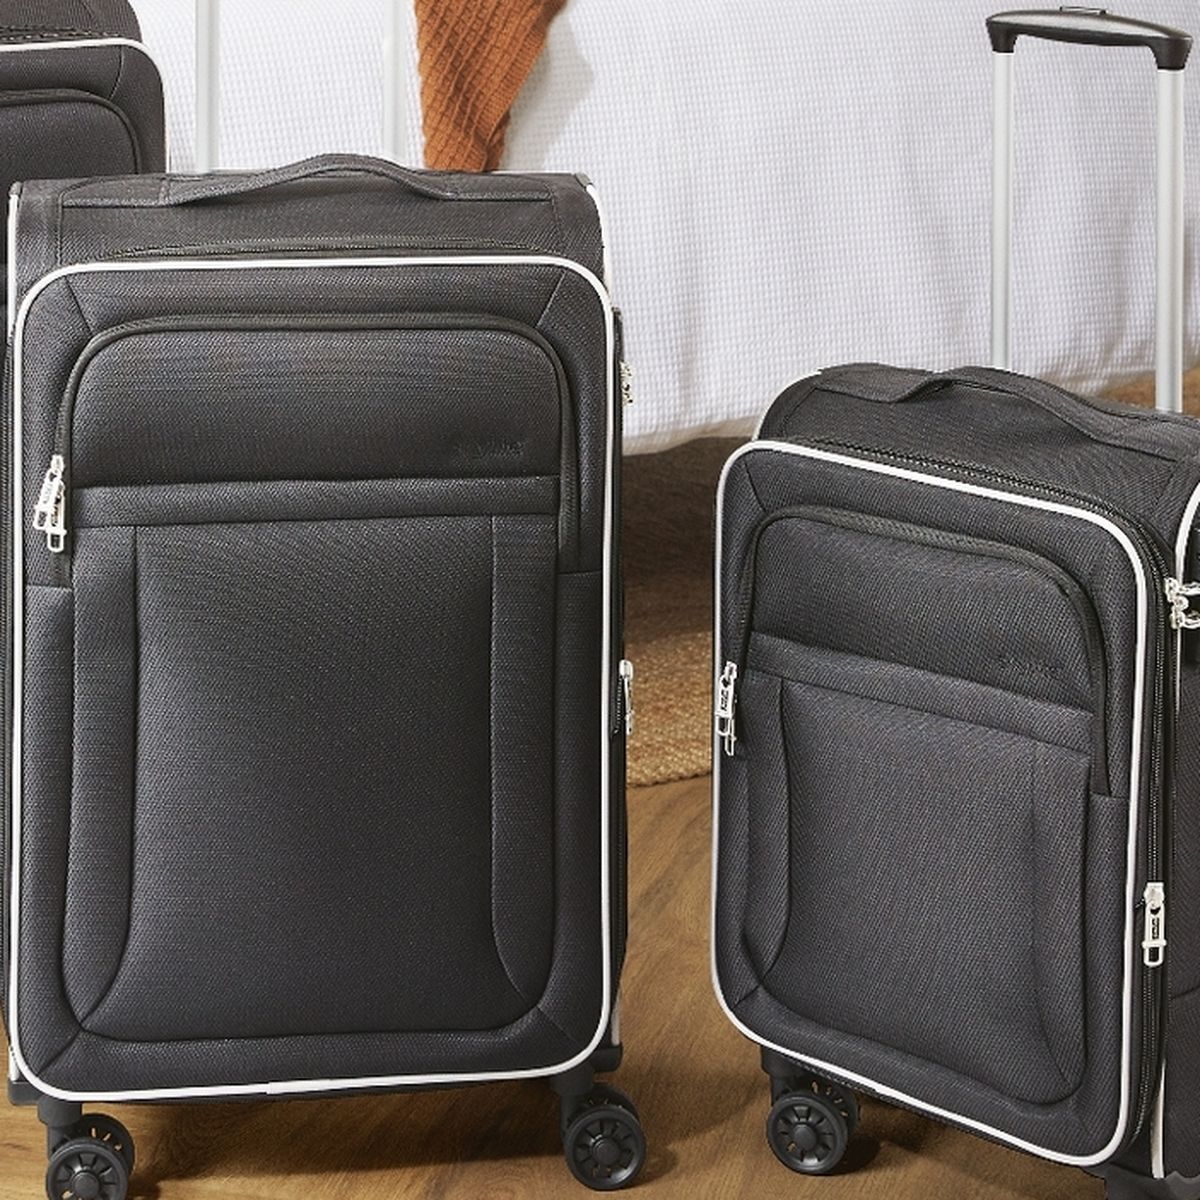 Flight Attendant-loved Luggage Is Up to 75% at